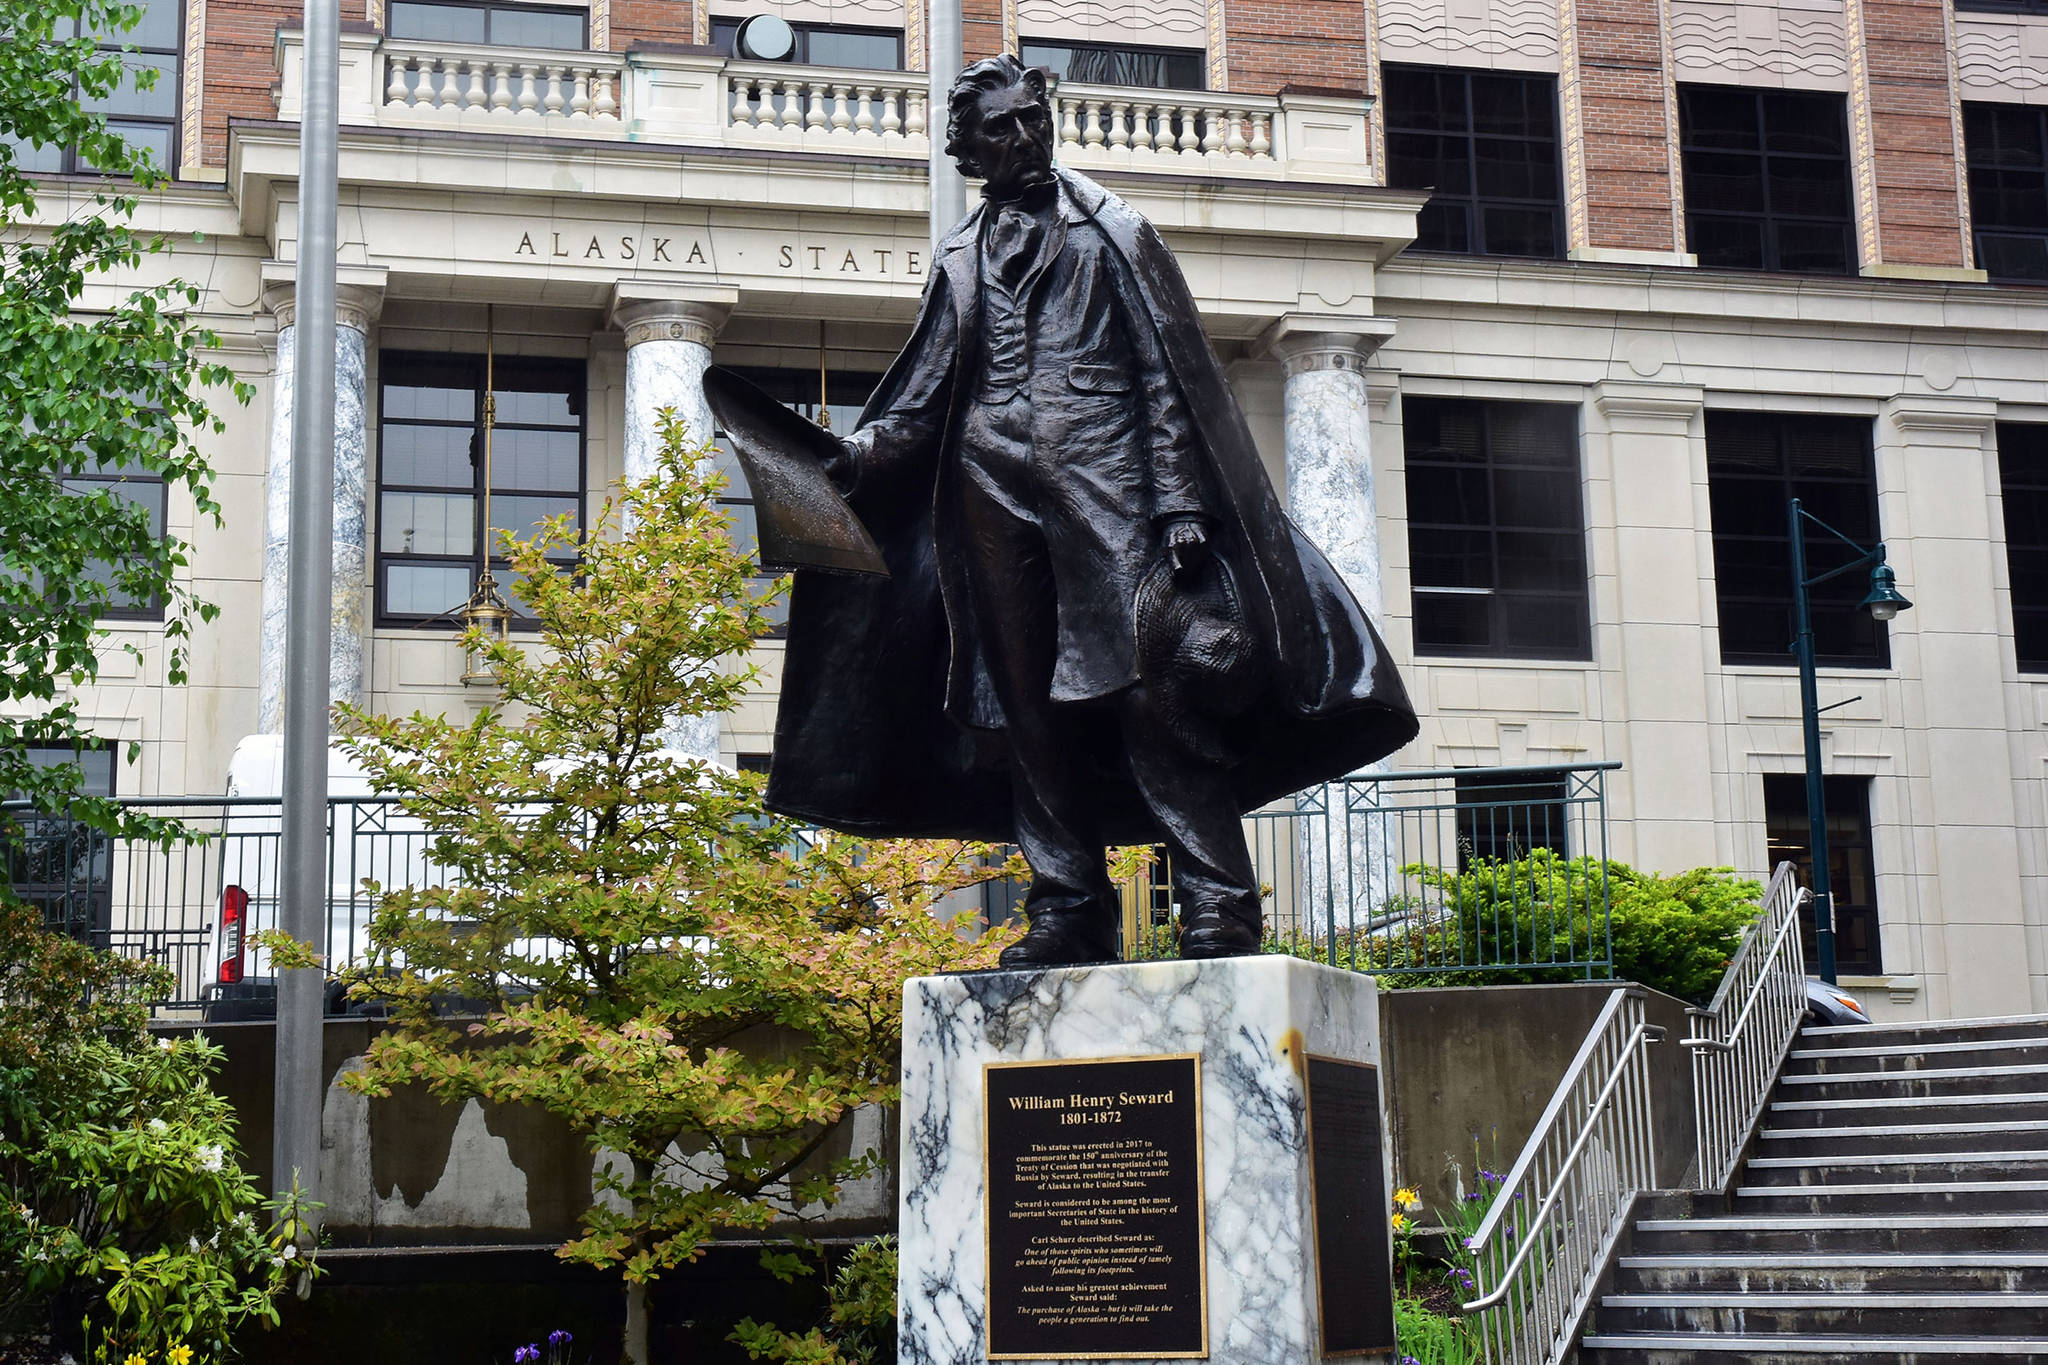 A statue of William Henry Seward, former U.S. senator and governor of New York, vice president and secretary of state, who negotiated the purchase of the Alaska territory from the Russian Empire in 1867 stands on Tuesday, June 16, 2020. A petition has been circulating online calling for the statue’s removal, citing the legacy of U.S. imperialism.